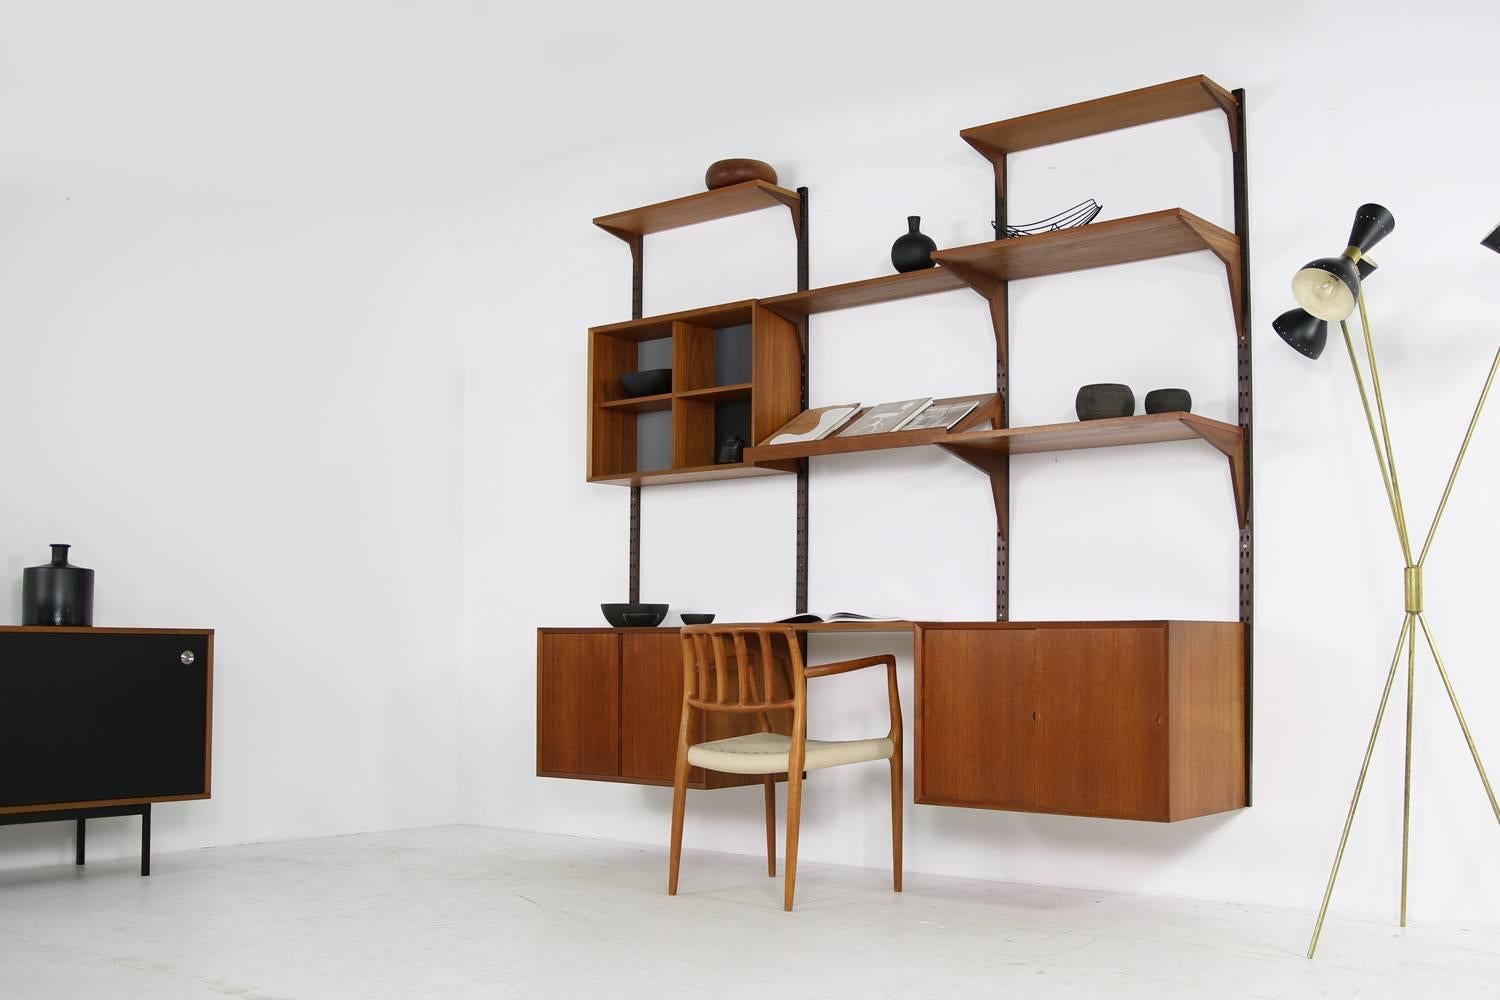 Fantastic 1960s teak wall unit designed by Poul Cadovius made by Cado, Denmark. The Scandinavian Royal shelving system is in a good condition, great patina on all parts, several teak color tones become one. Fully modular system.
Measures like built